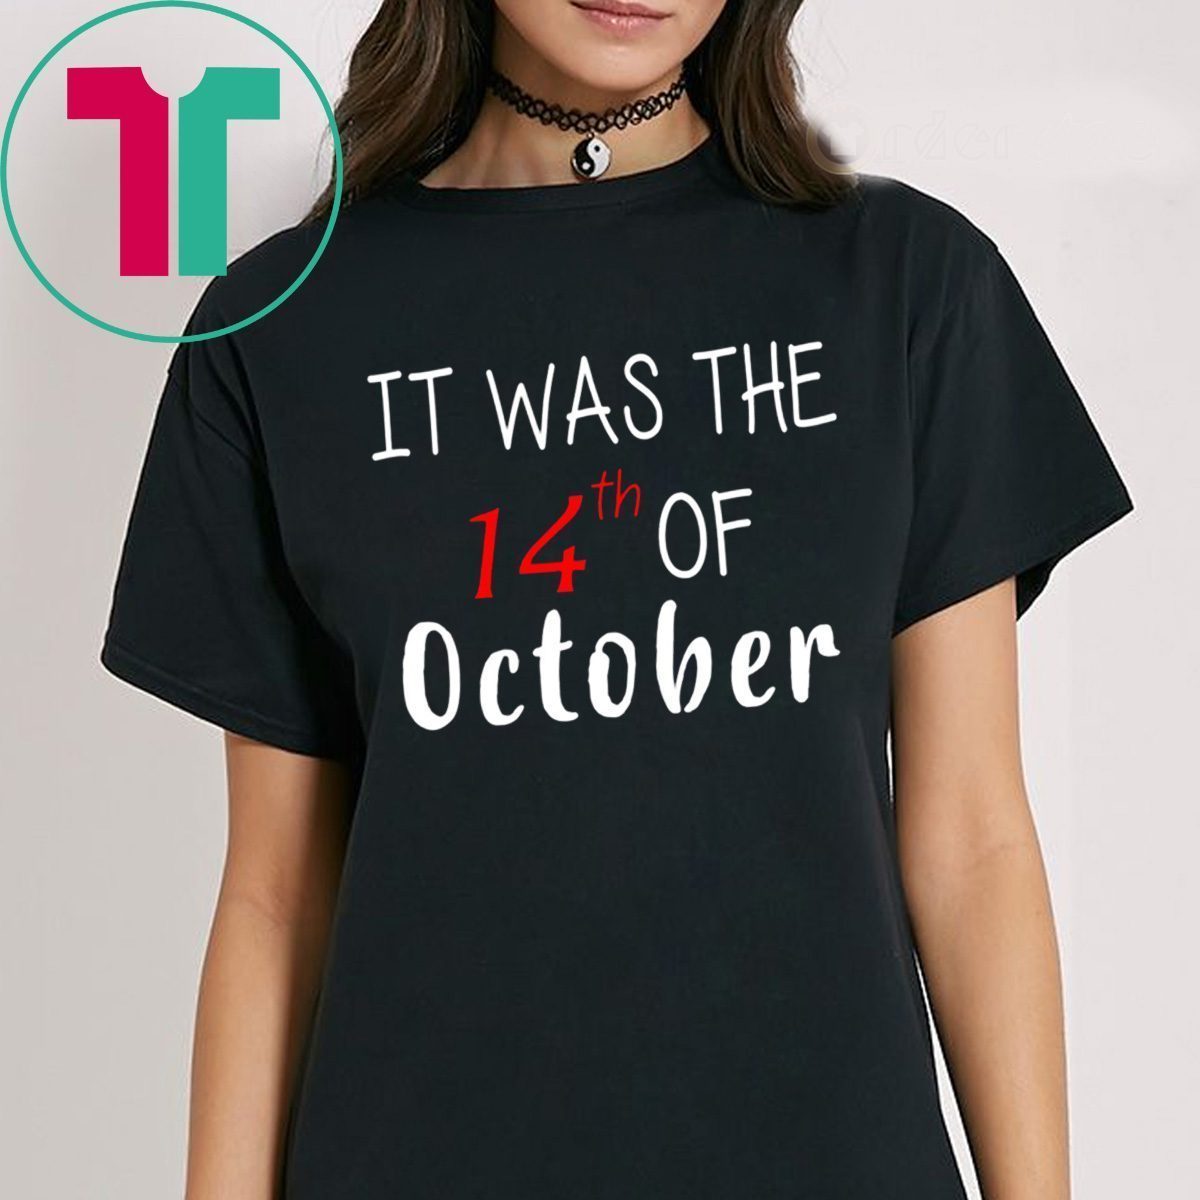 It was the 14th of october had that t-shirt - Reviewshirts Office